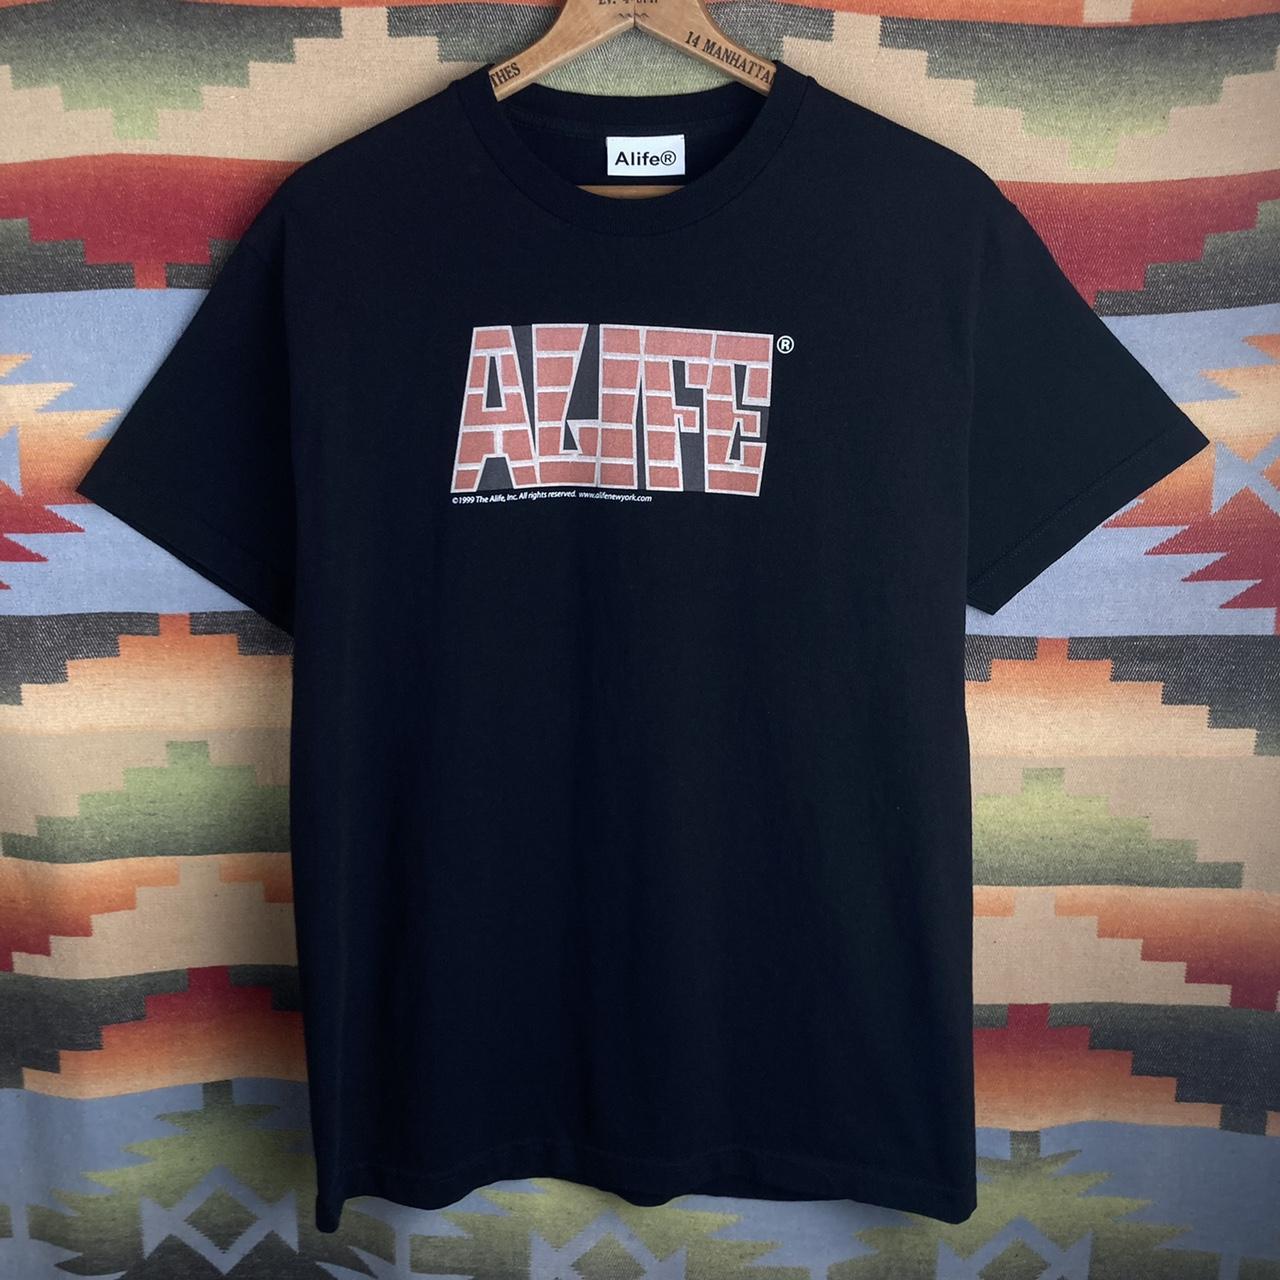 Alife Men's Black and Red T-shirt (2)